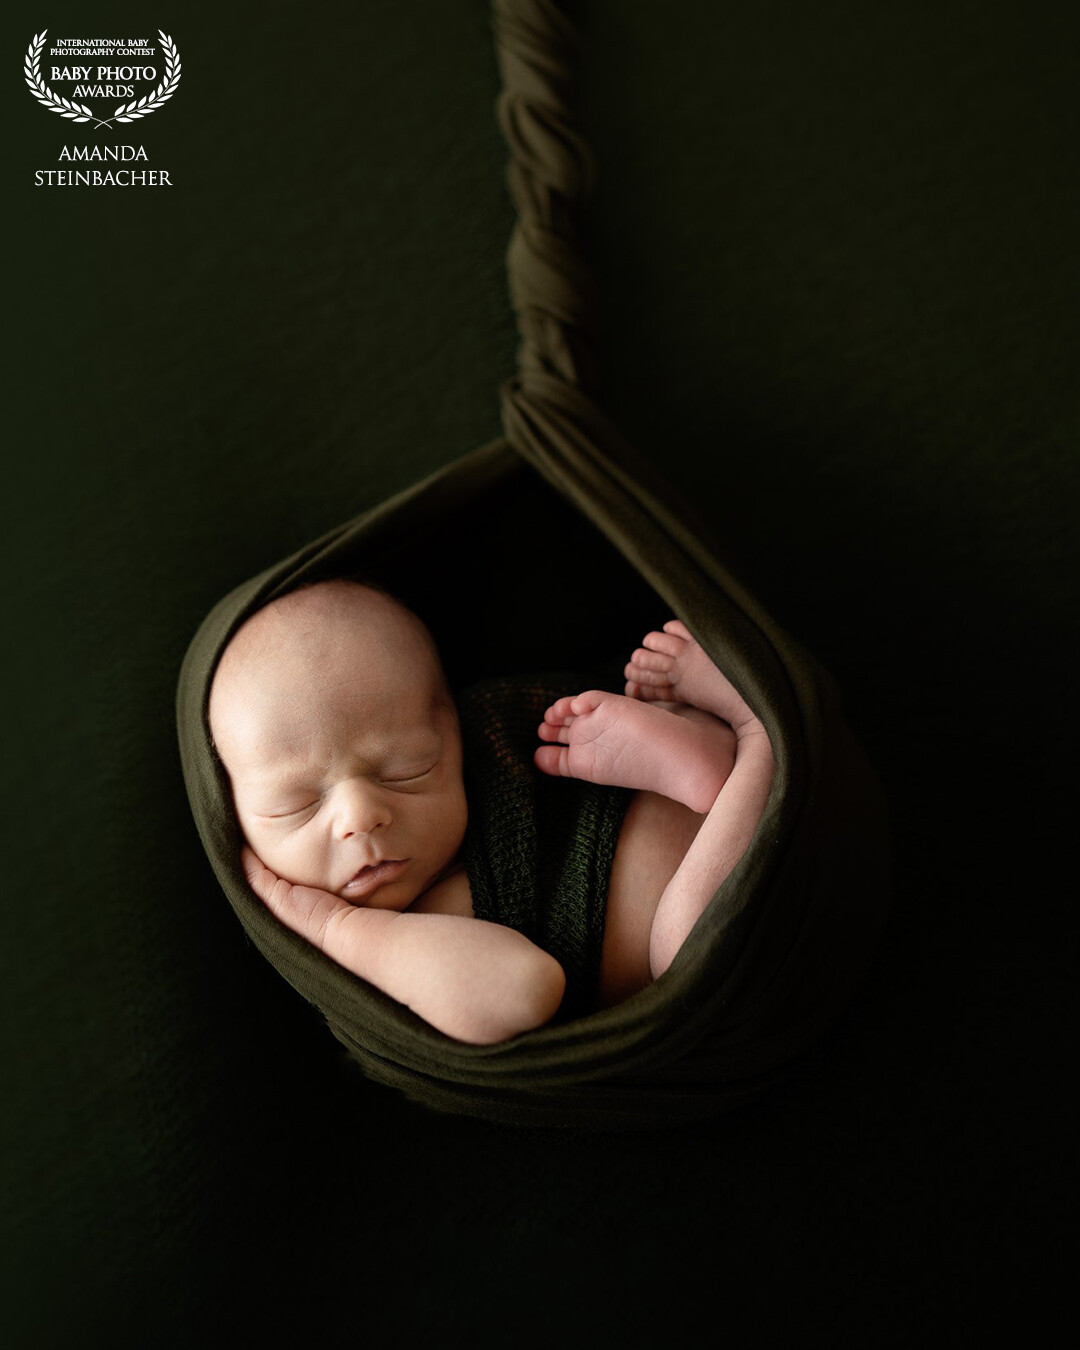 Simple yet timeless imagery is my specialty when it comes to photographing newborns.  This is one of my most requested poses for client galleries.